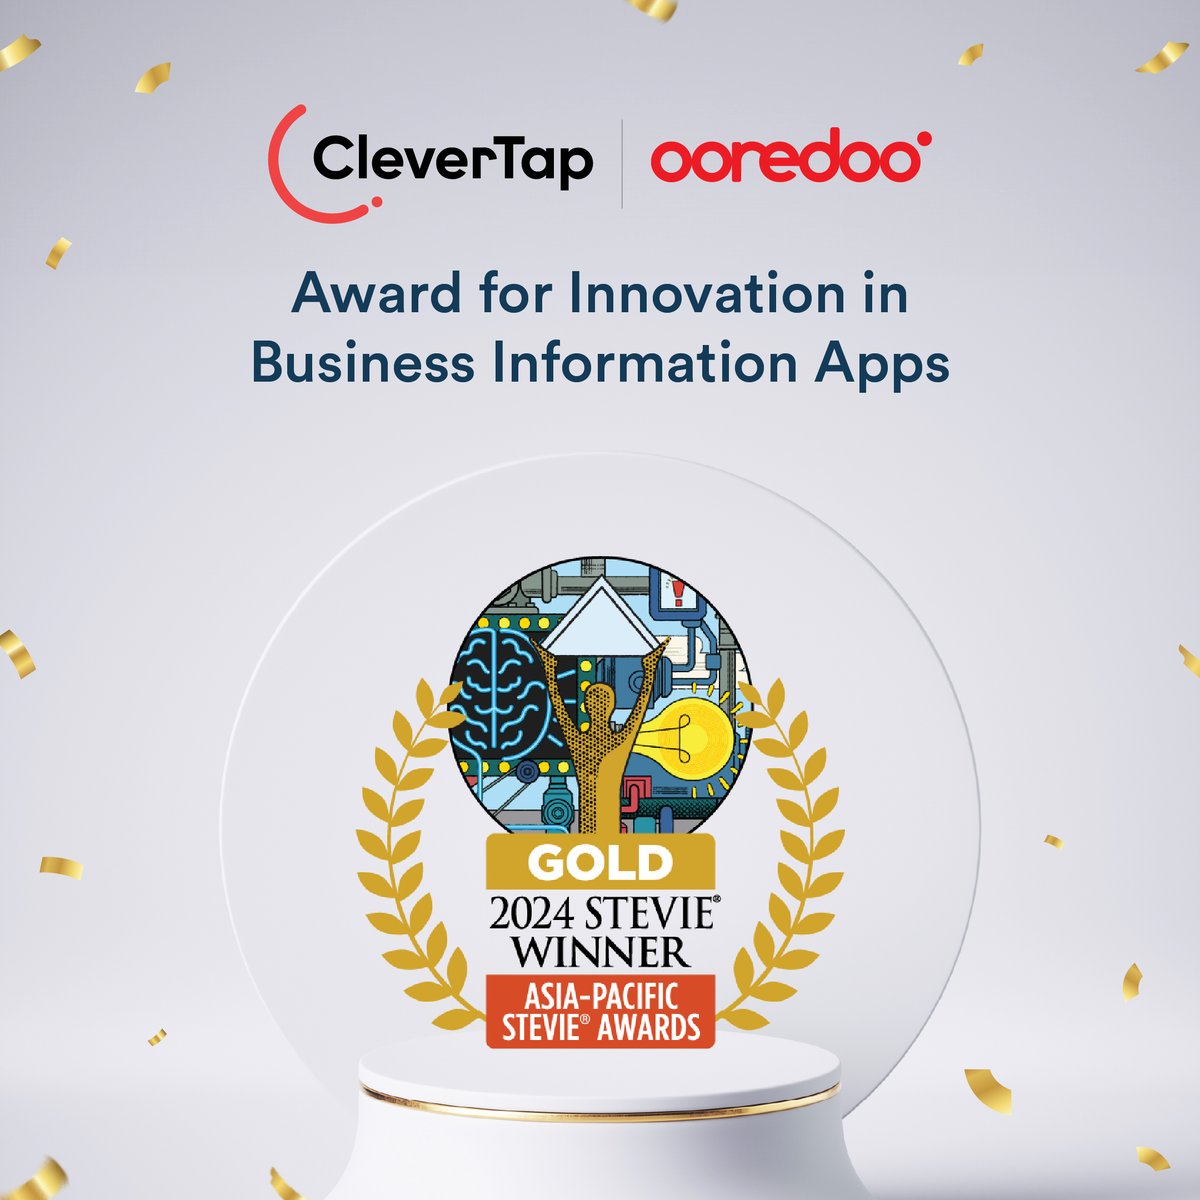 We're thrilled to announce that @ooredoo & CleverTap have clinched a GOLD win for Innovation in Business Information Apps at the prestigious @TheStevieAwards! ⭐ Collaborating with Ooredoo Group, we're at the front of revolutionizing app engagement. 🚀 #StevieAwards2024